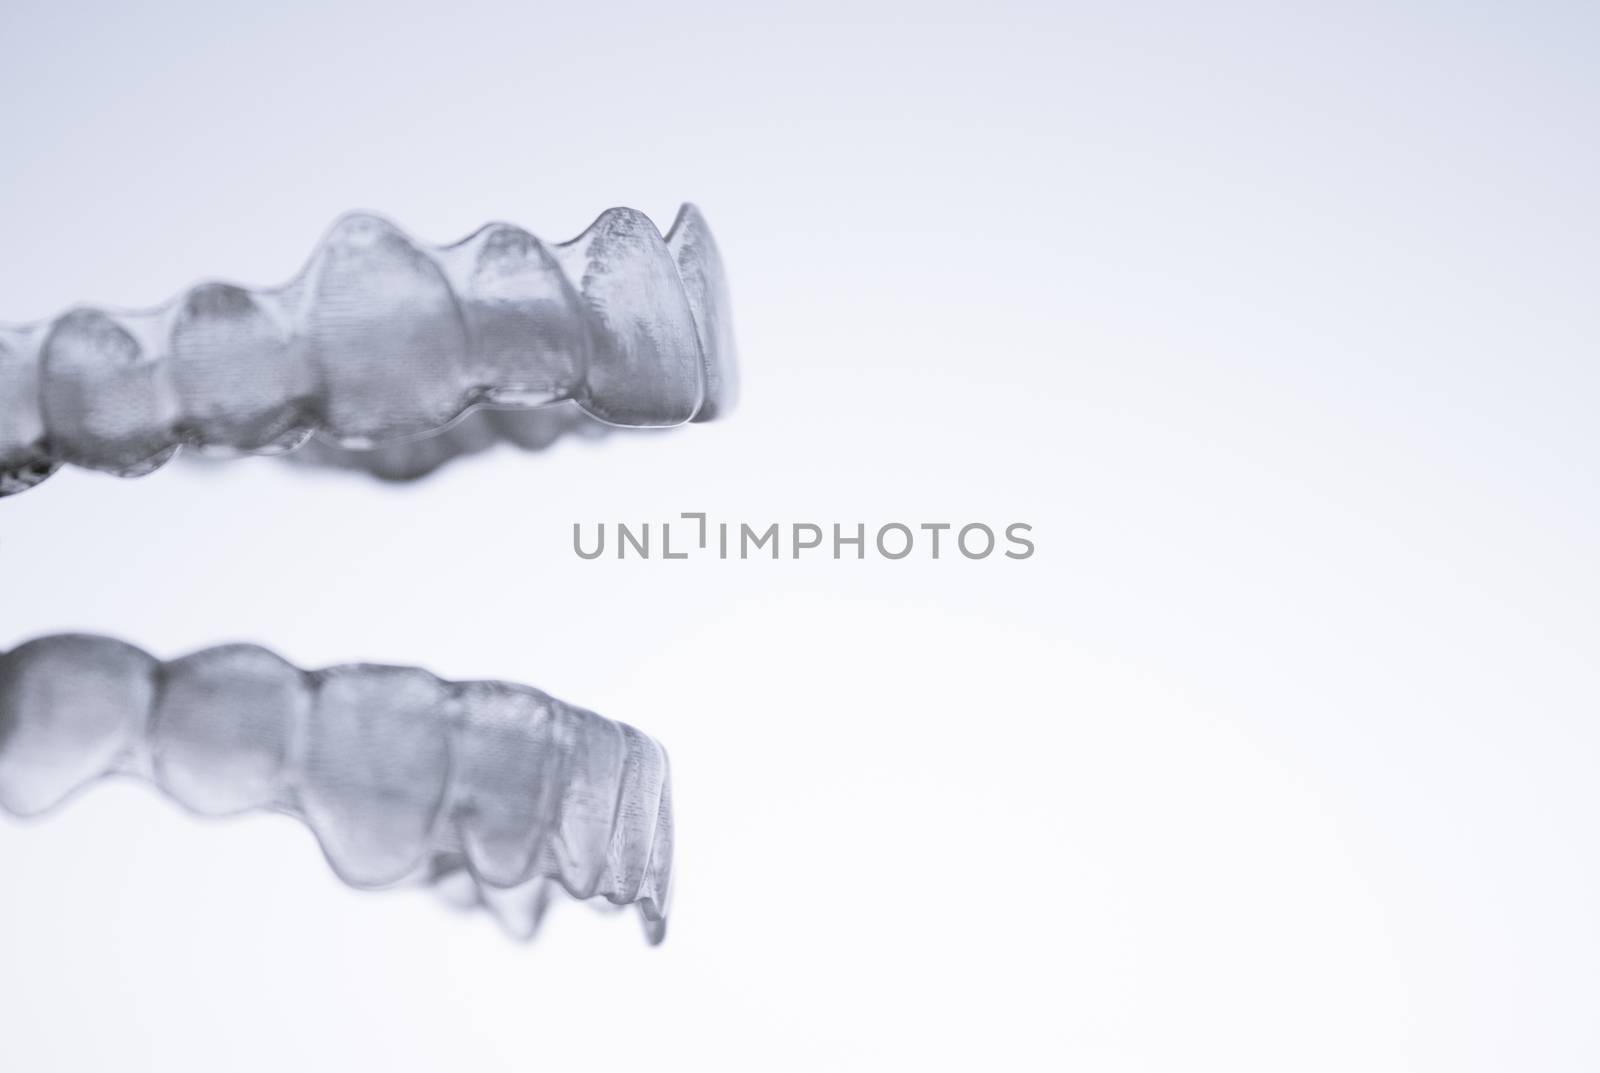 Invisible orthodontics for aligning teeth